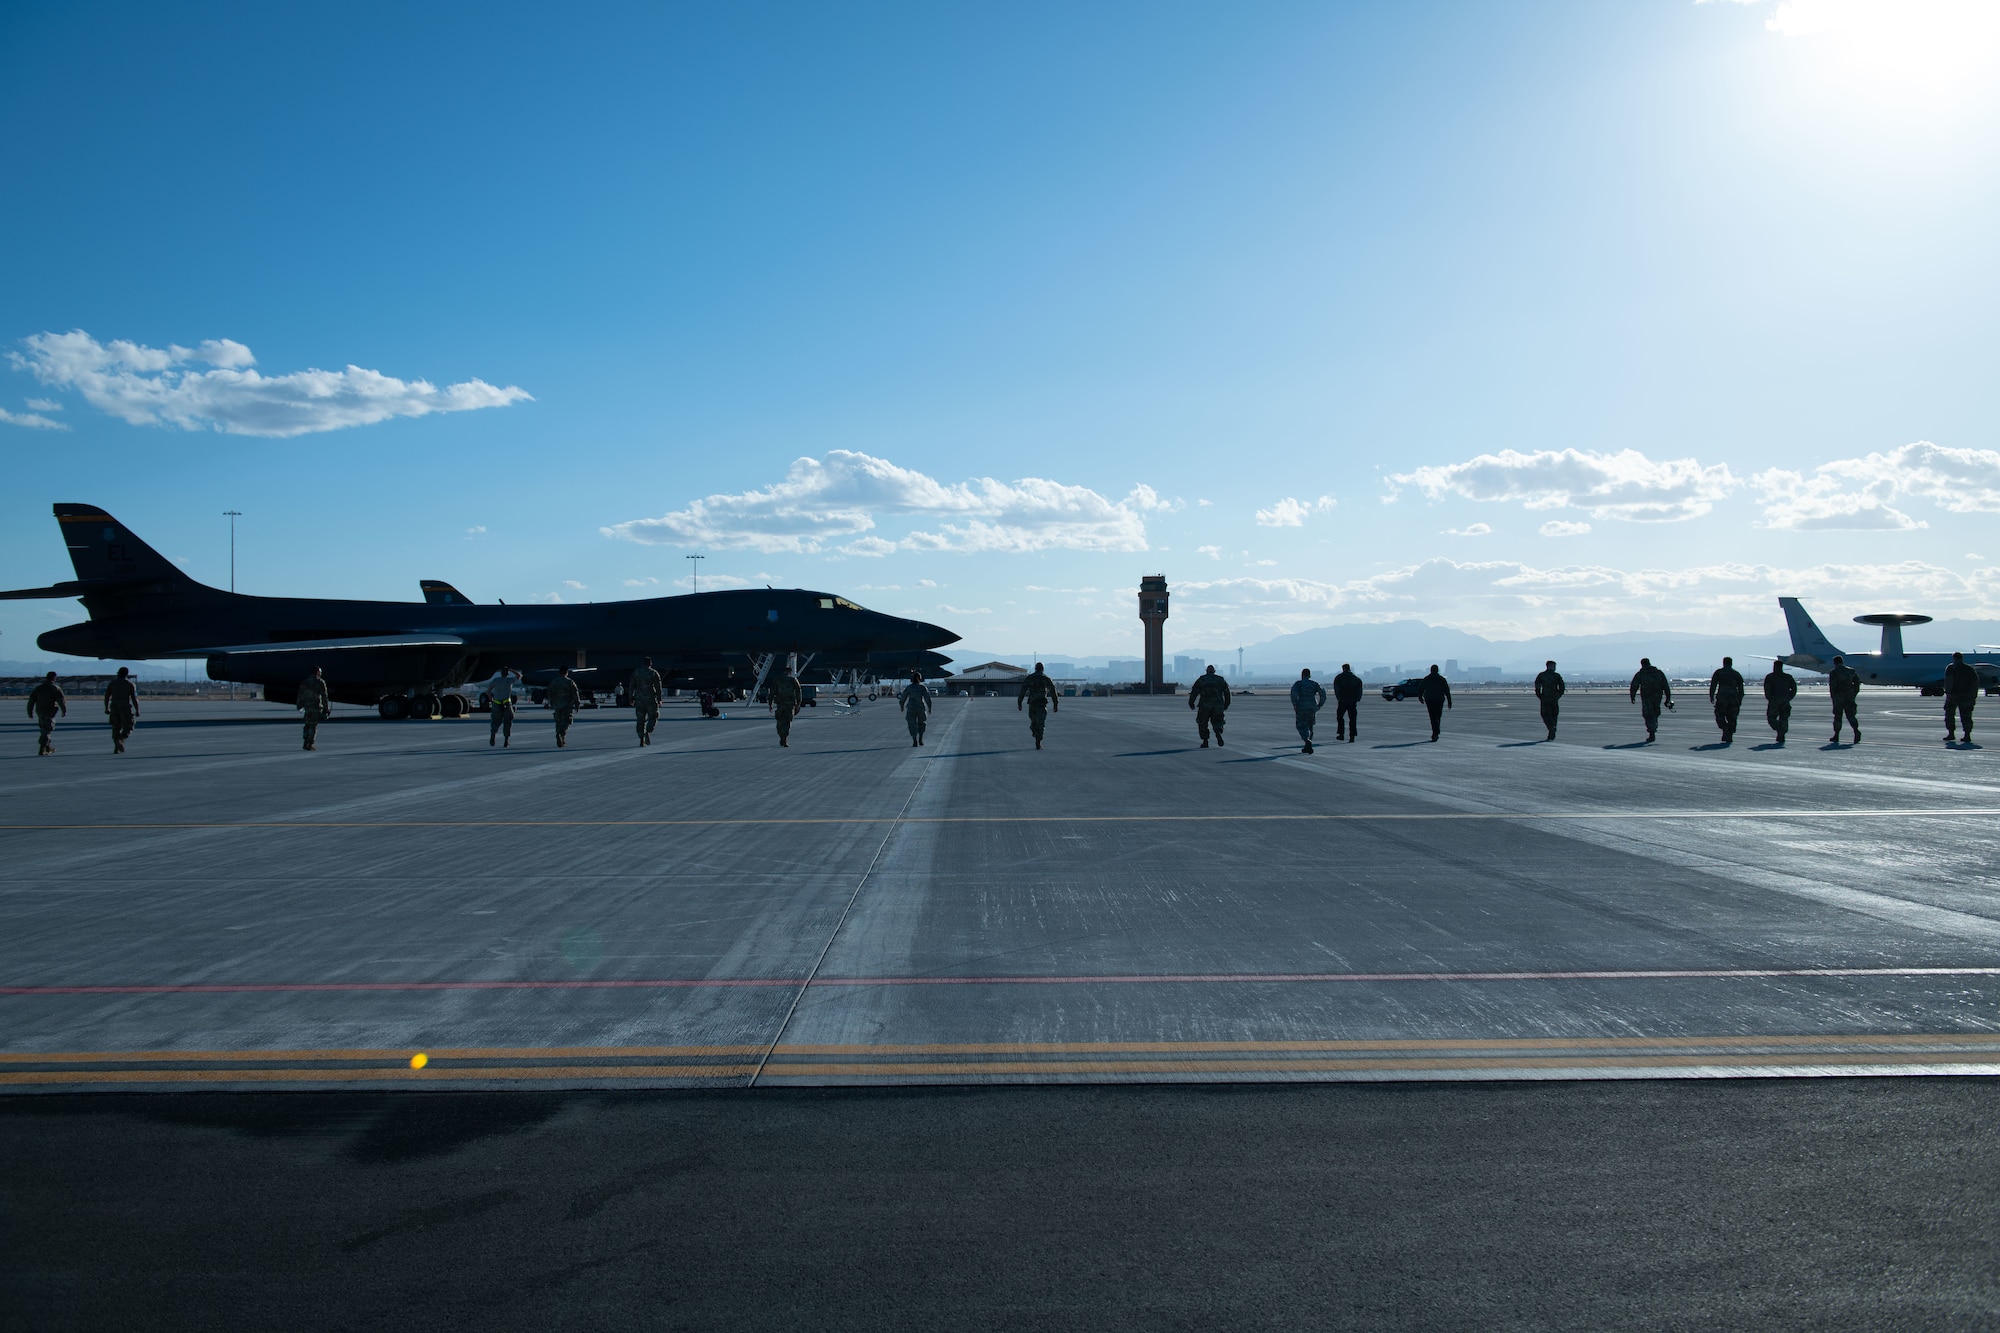 Airmen from the 28th Aircraft Maintenance Squadron perform a foreign object debris (FOD) check along the flight line during Red Flag 21-2 at Nellis Air Force Base, Nev., March 9, 2021.